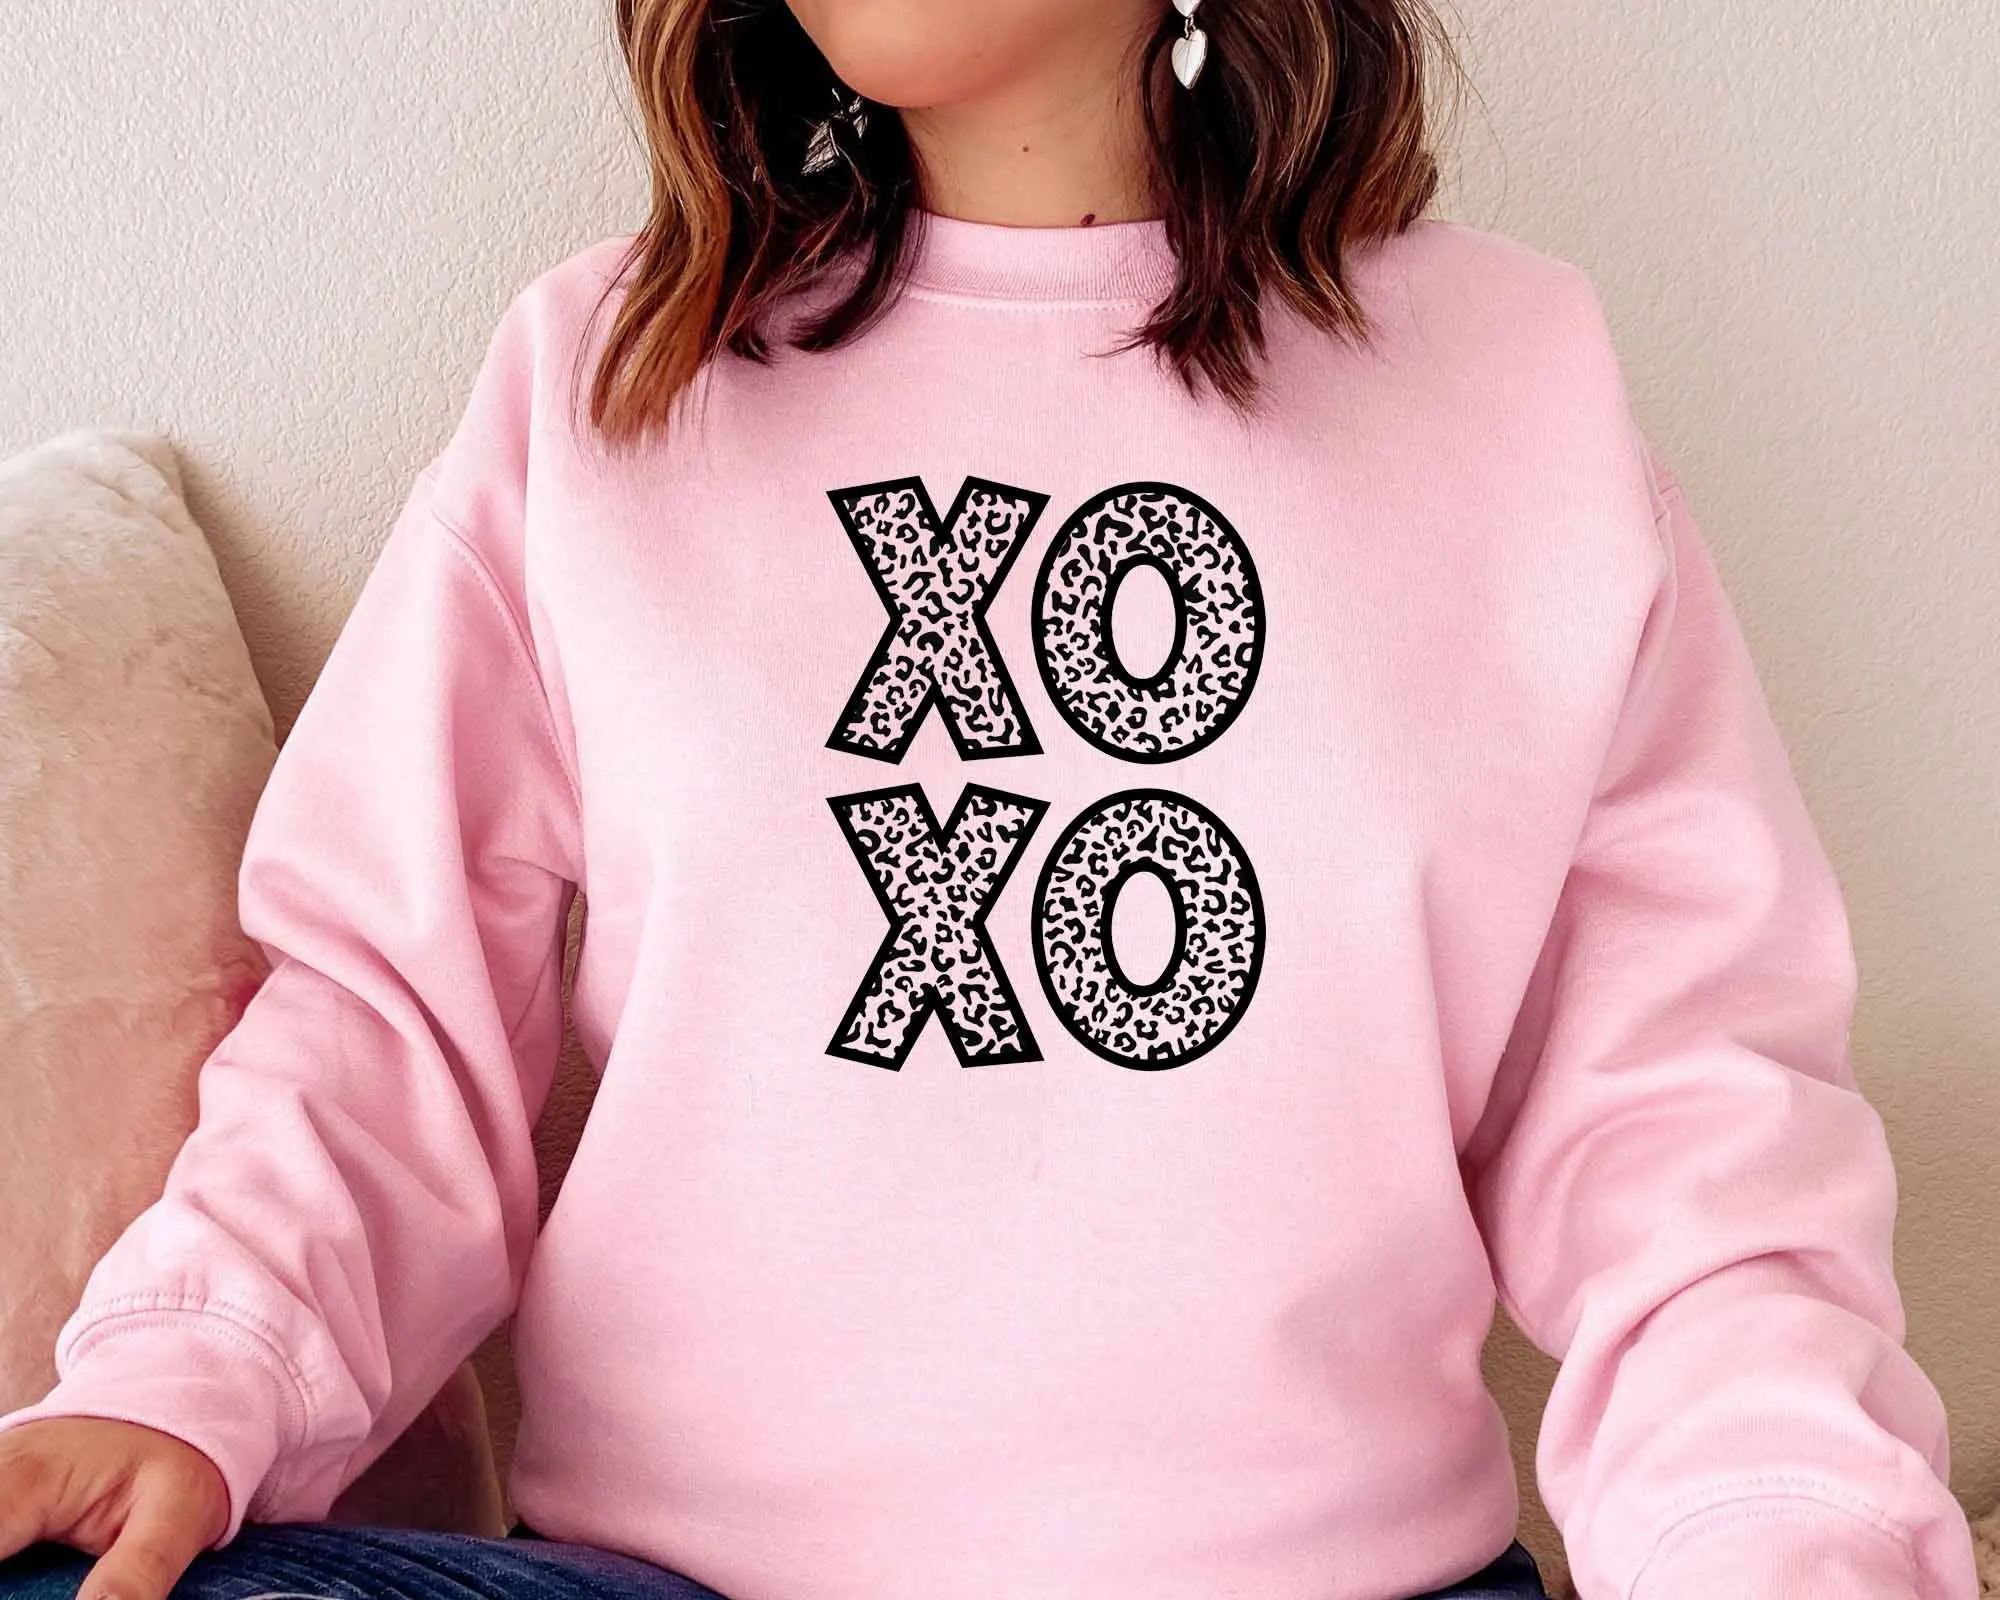 

Leopard Print Xoxo Valentine's Day Valentines Day funny graphic women fashion grunge tumblr sweashirt girl gift party pullovers